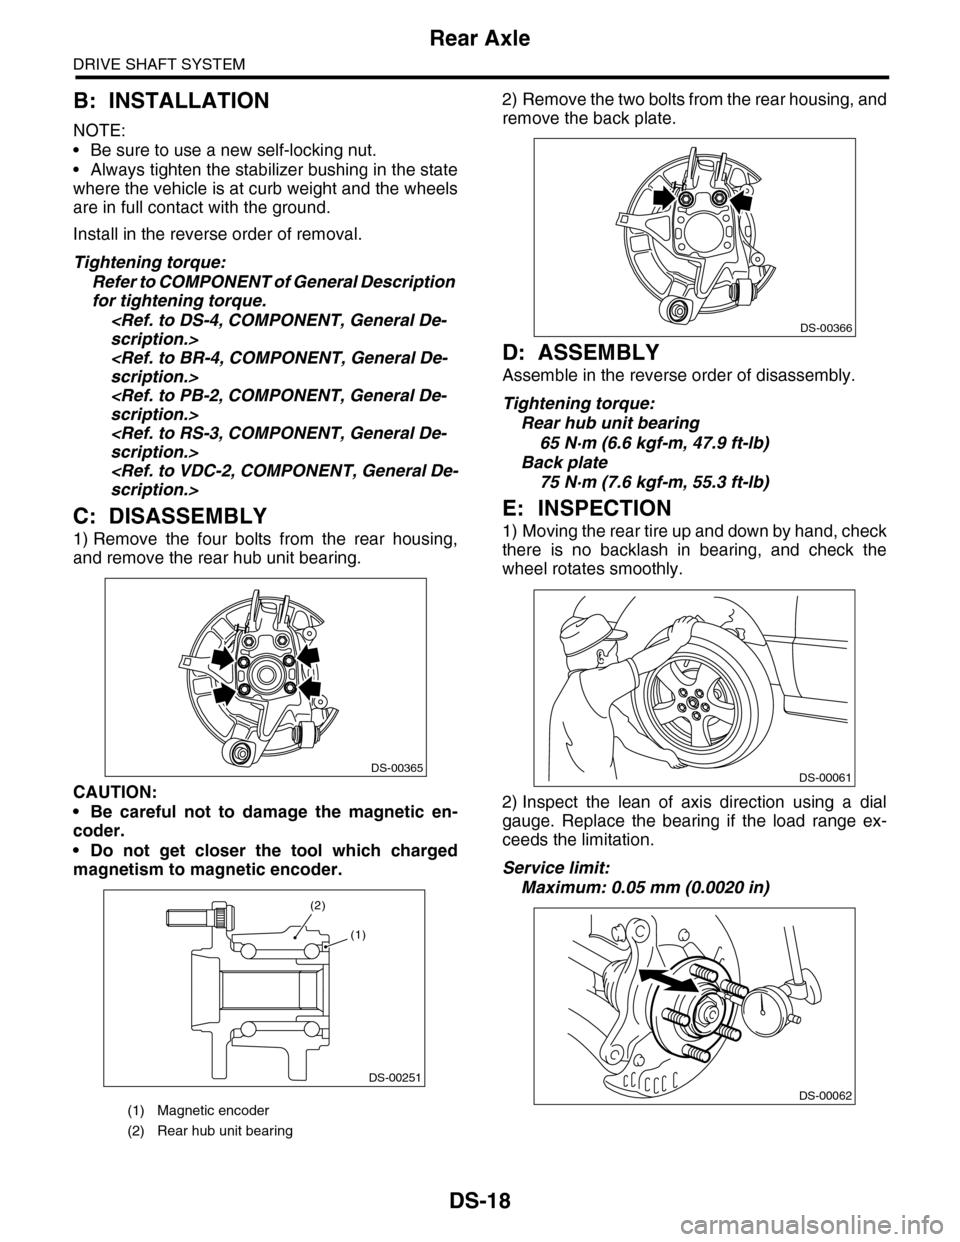 SUBARU TRIBECA 2009 1.G Service Workshop Manual DS-18
Rear Axle
DRIVE SHAFT SYSTEM
B: INSTALLATION
NOTE:
•Be sure to use a new self-locking nut.
•Always tighten the stabilizer bushing in the state
where the vehicle is at curb weight and the whe